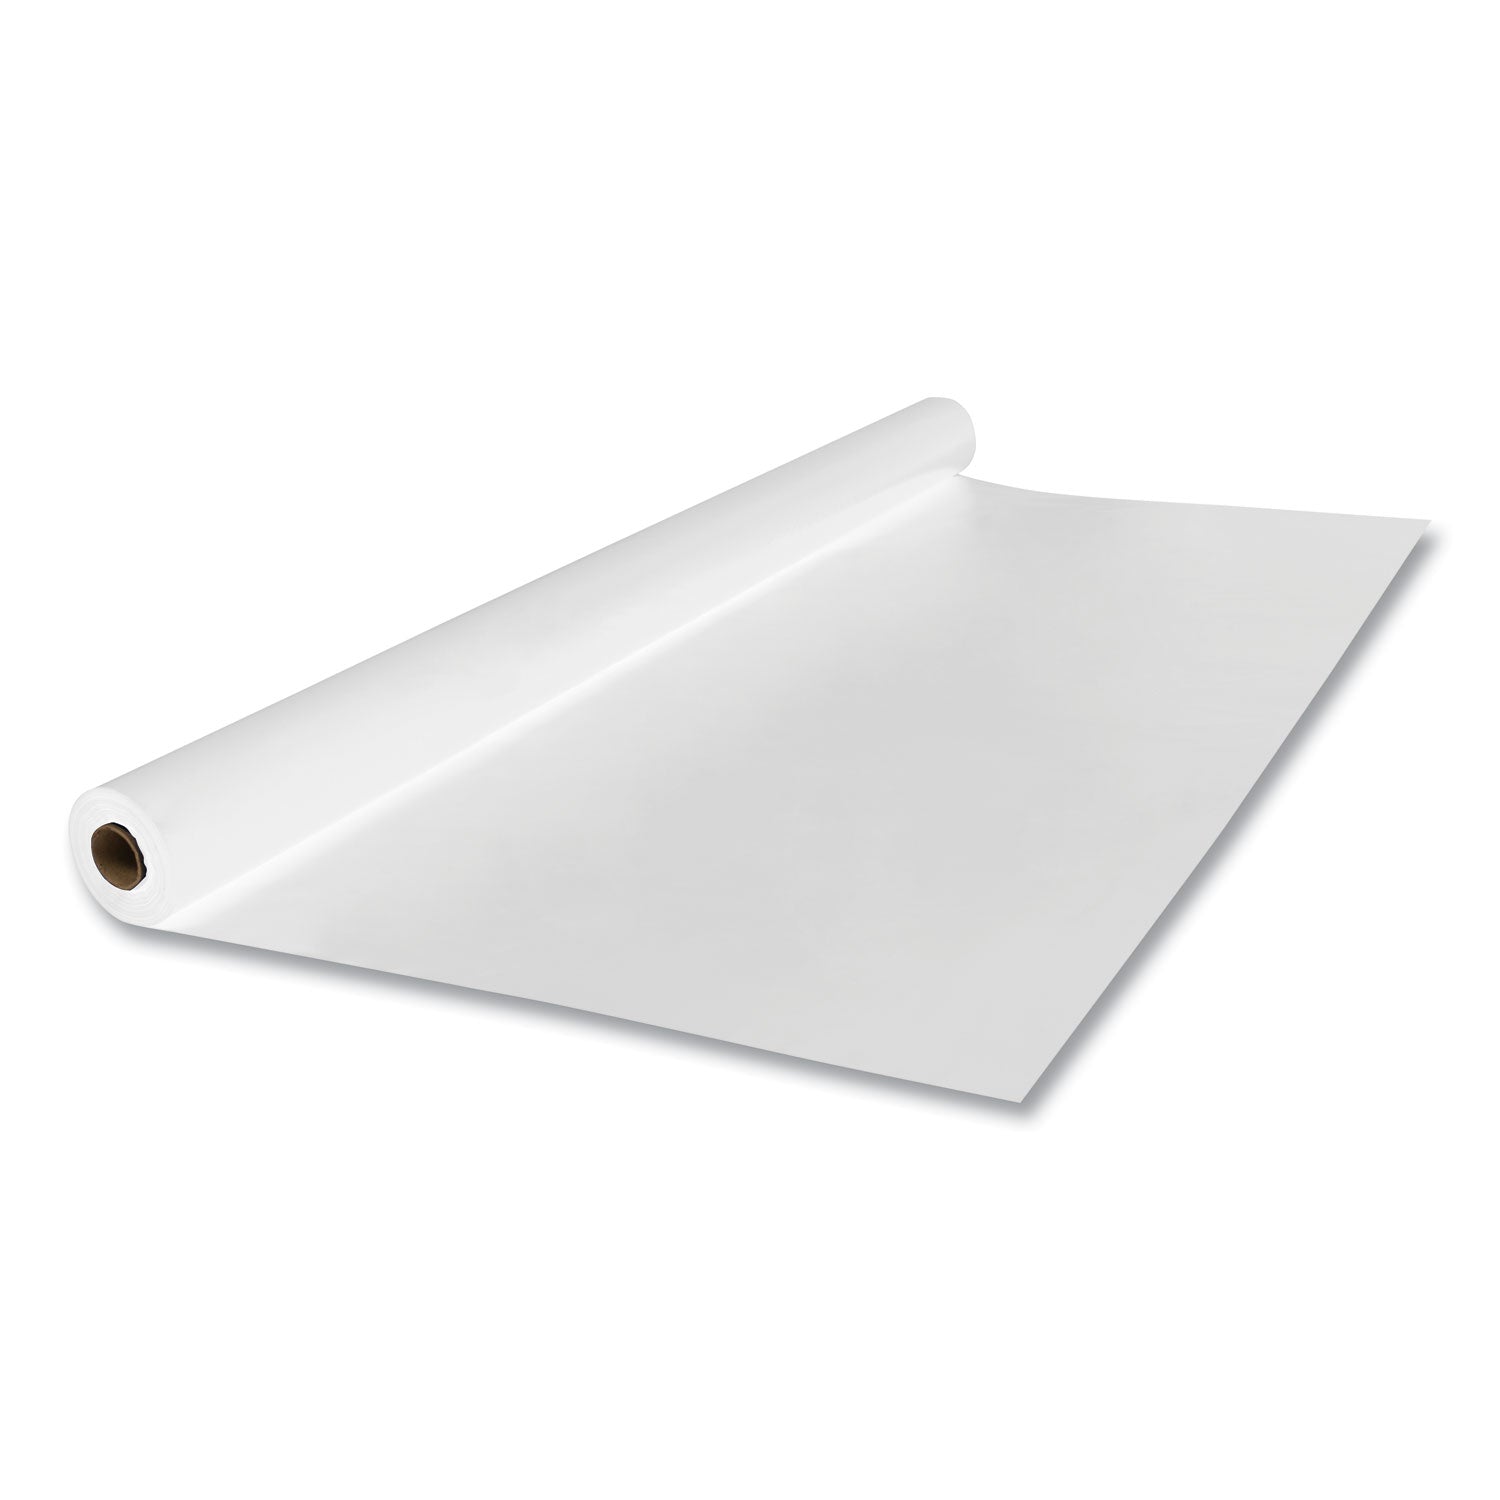 Linen-Soft Non-Woven Polyester Banquet Roll, Cut-To-Fit, 40" x 50 ft, White - 